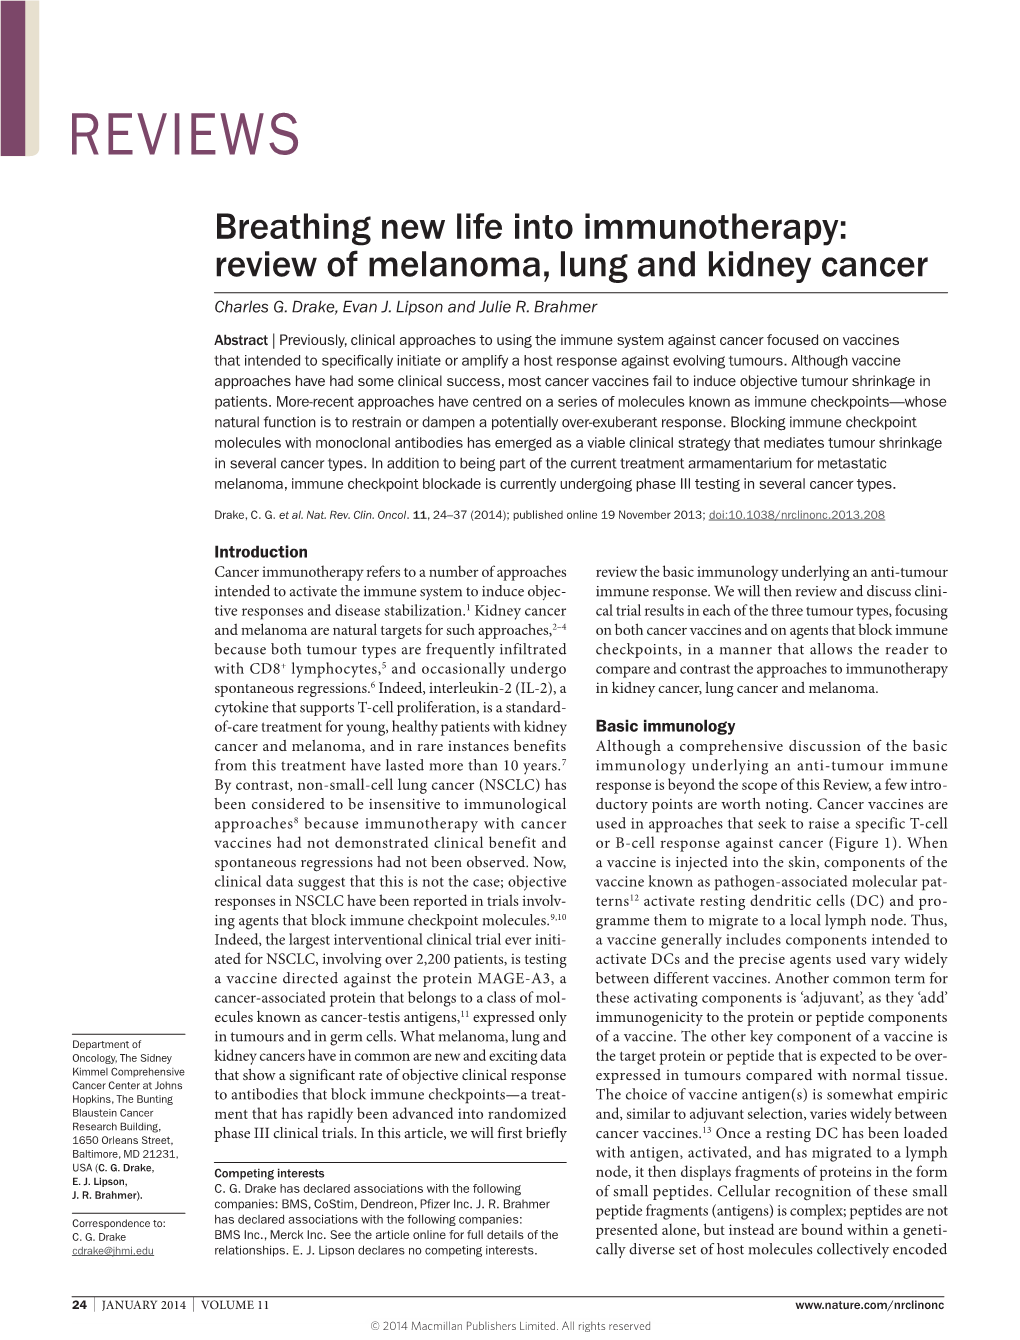 Review of Melanoma, Lung and Kidney Cancer Charles G